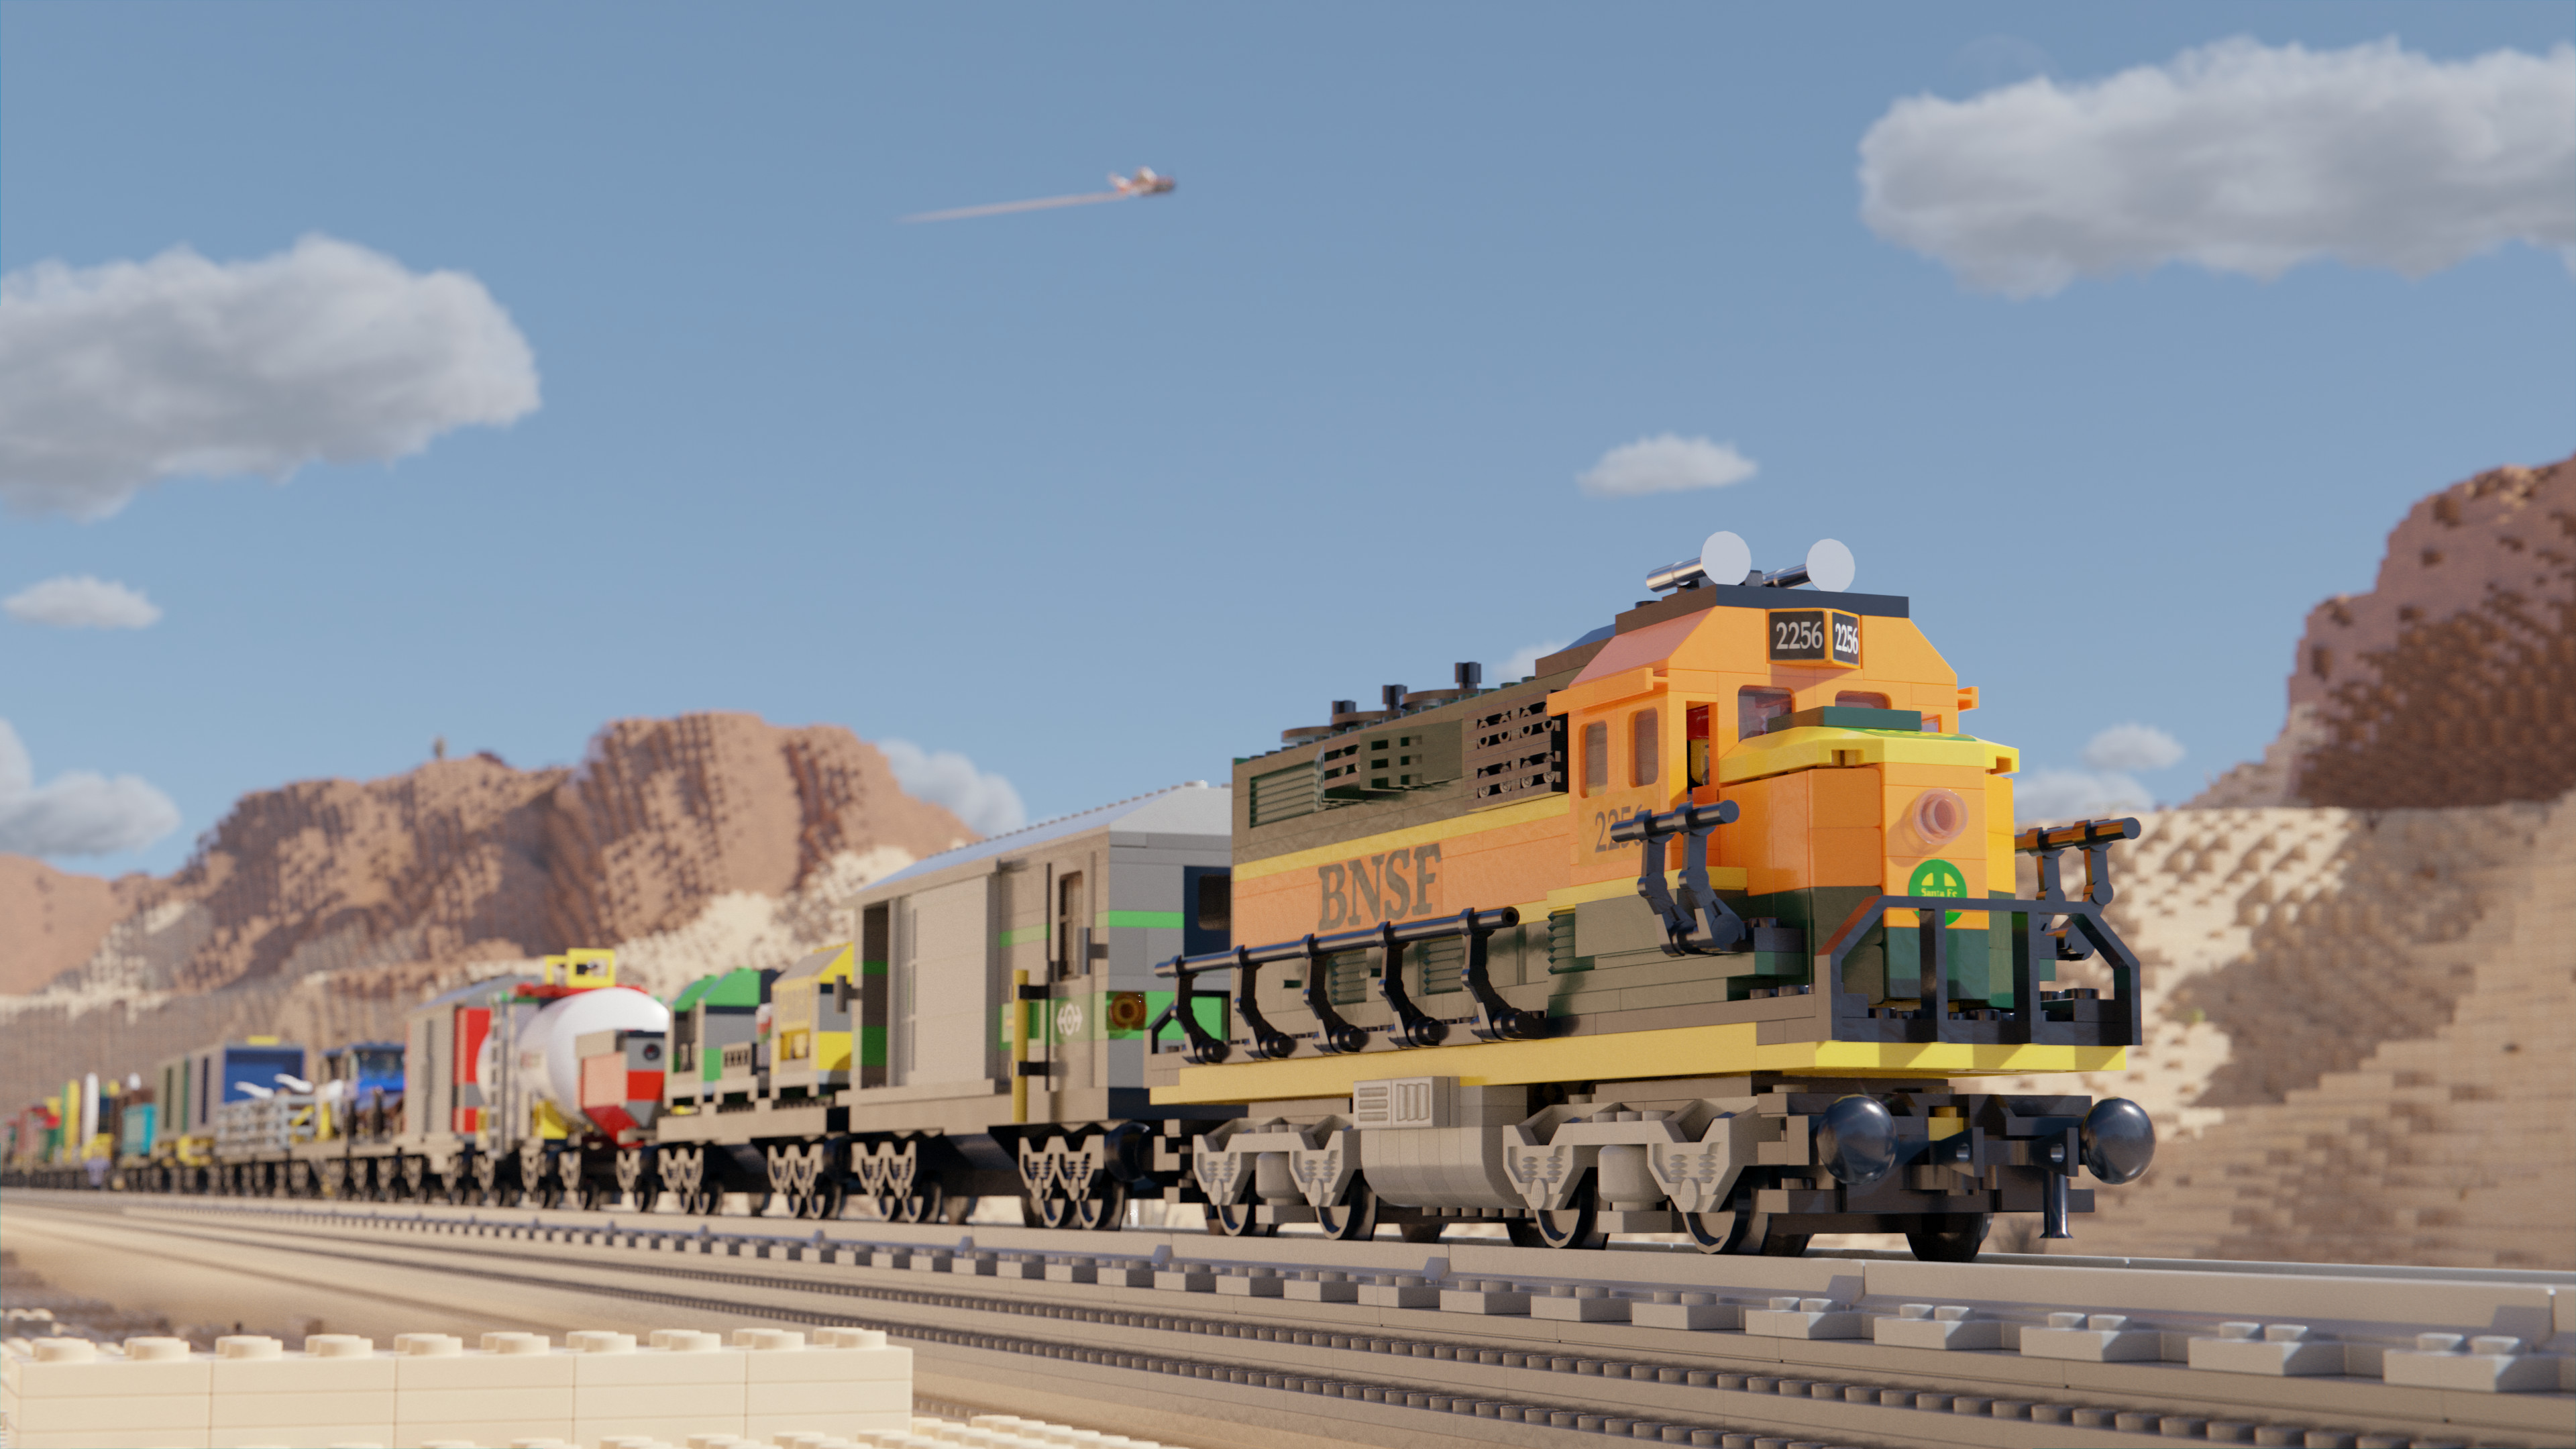 Image of a Lego train, travelling through a desert landscape on a sunny day, with some clouds in the sky and an airplane flying overhead.